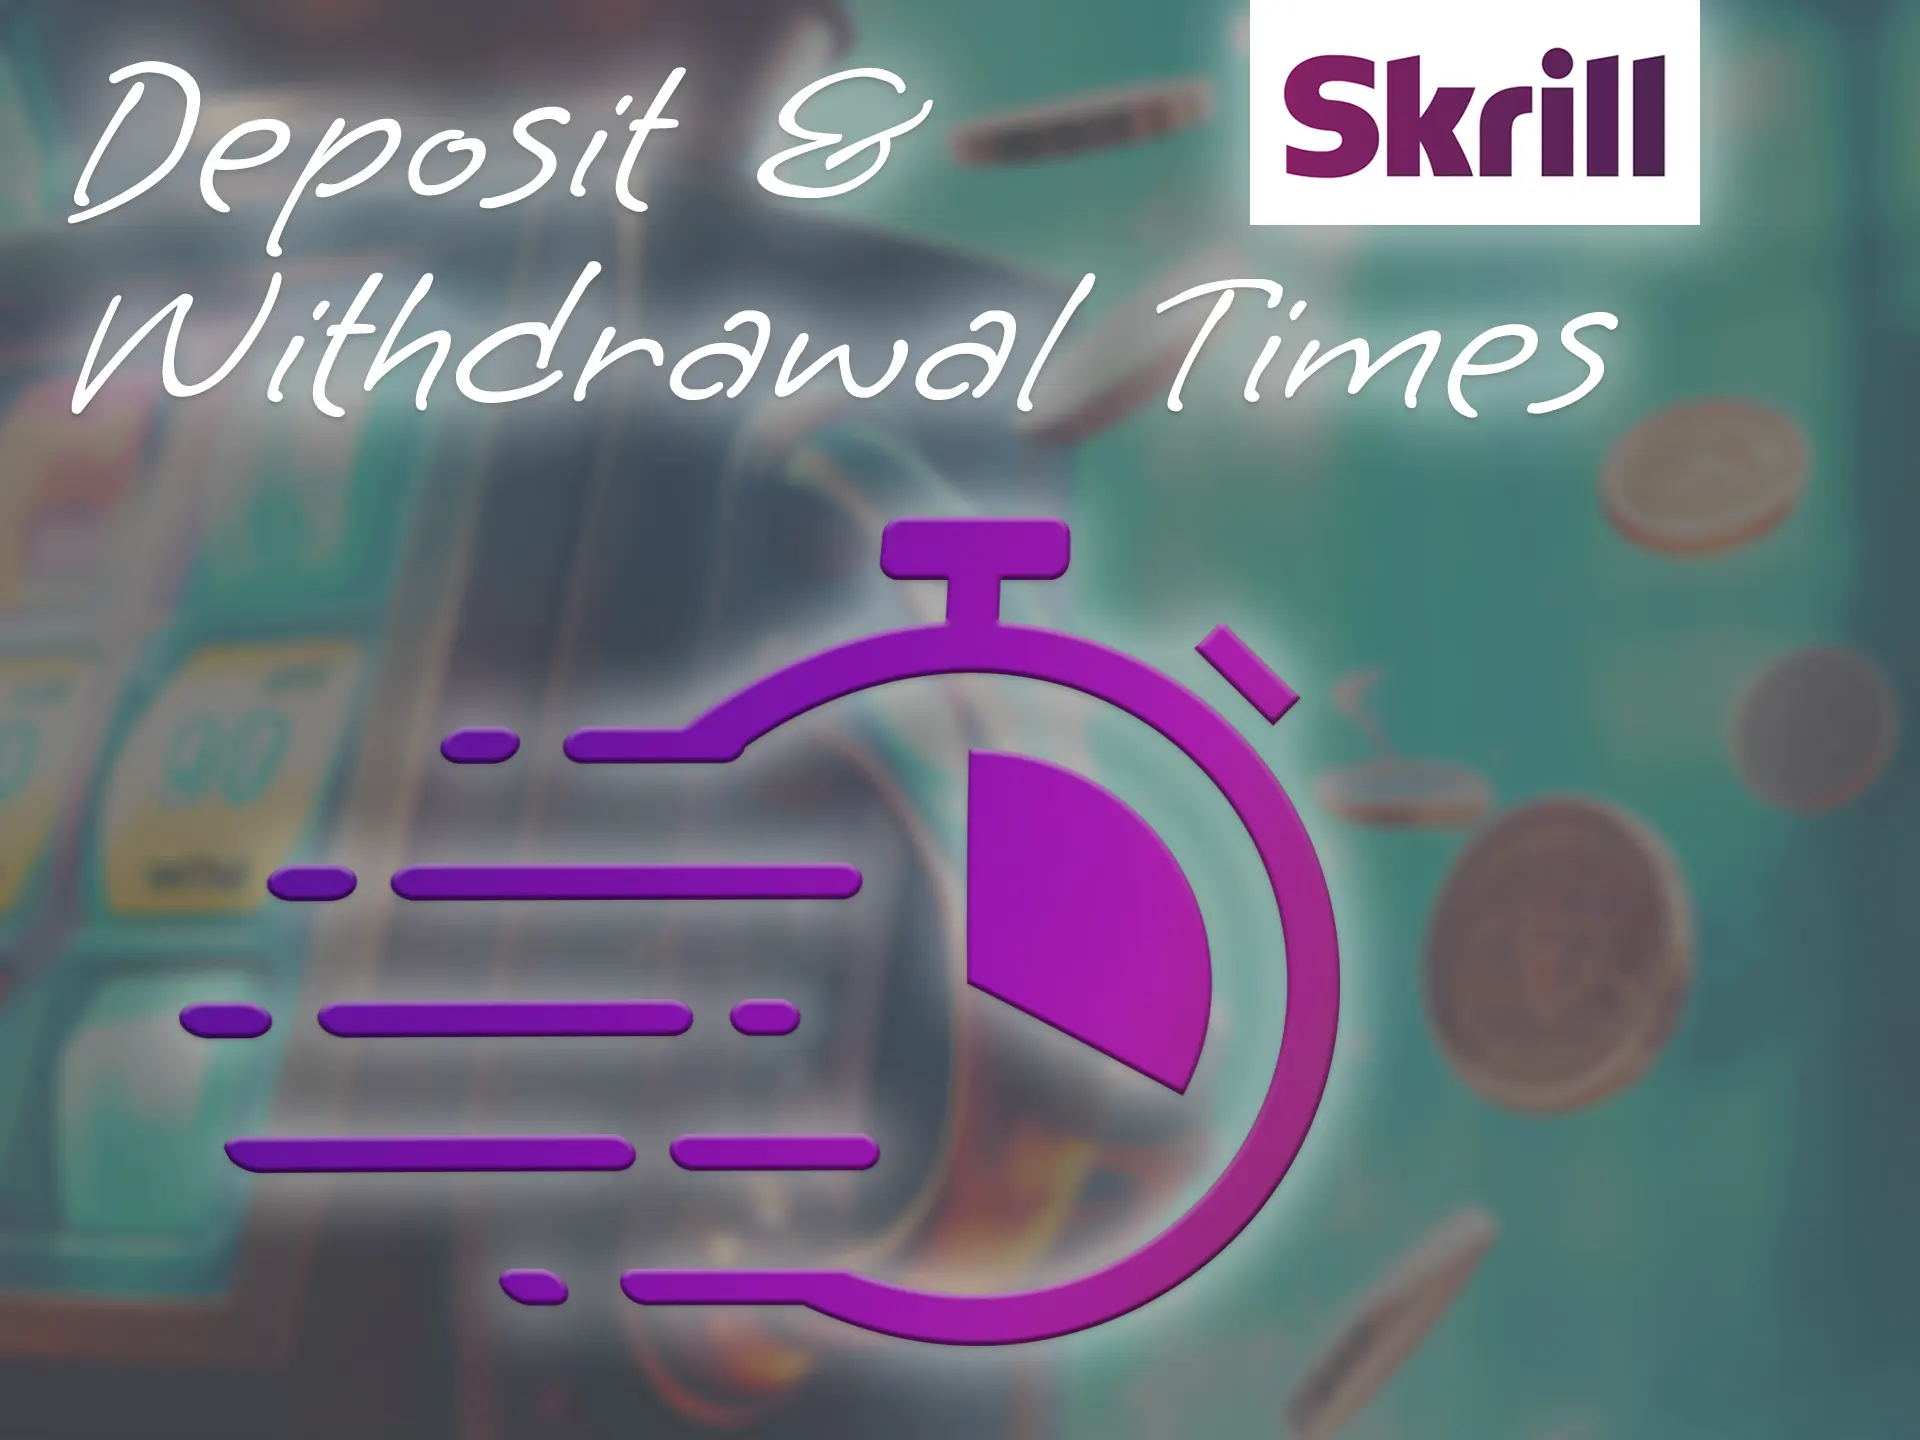 The funds are instantly credited to your gaming account using Skrill.